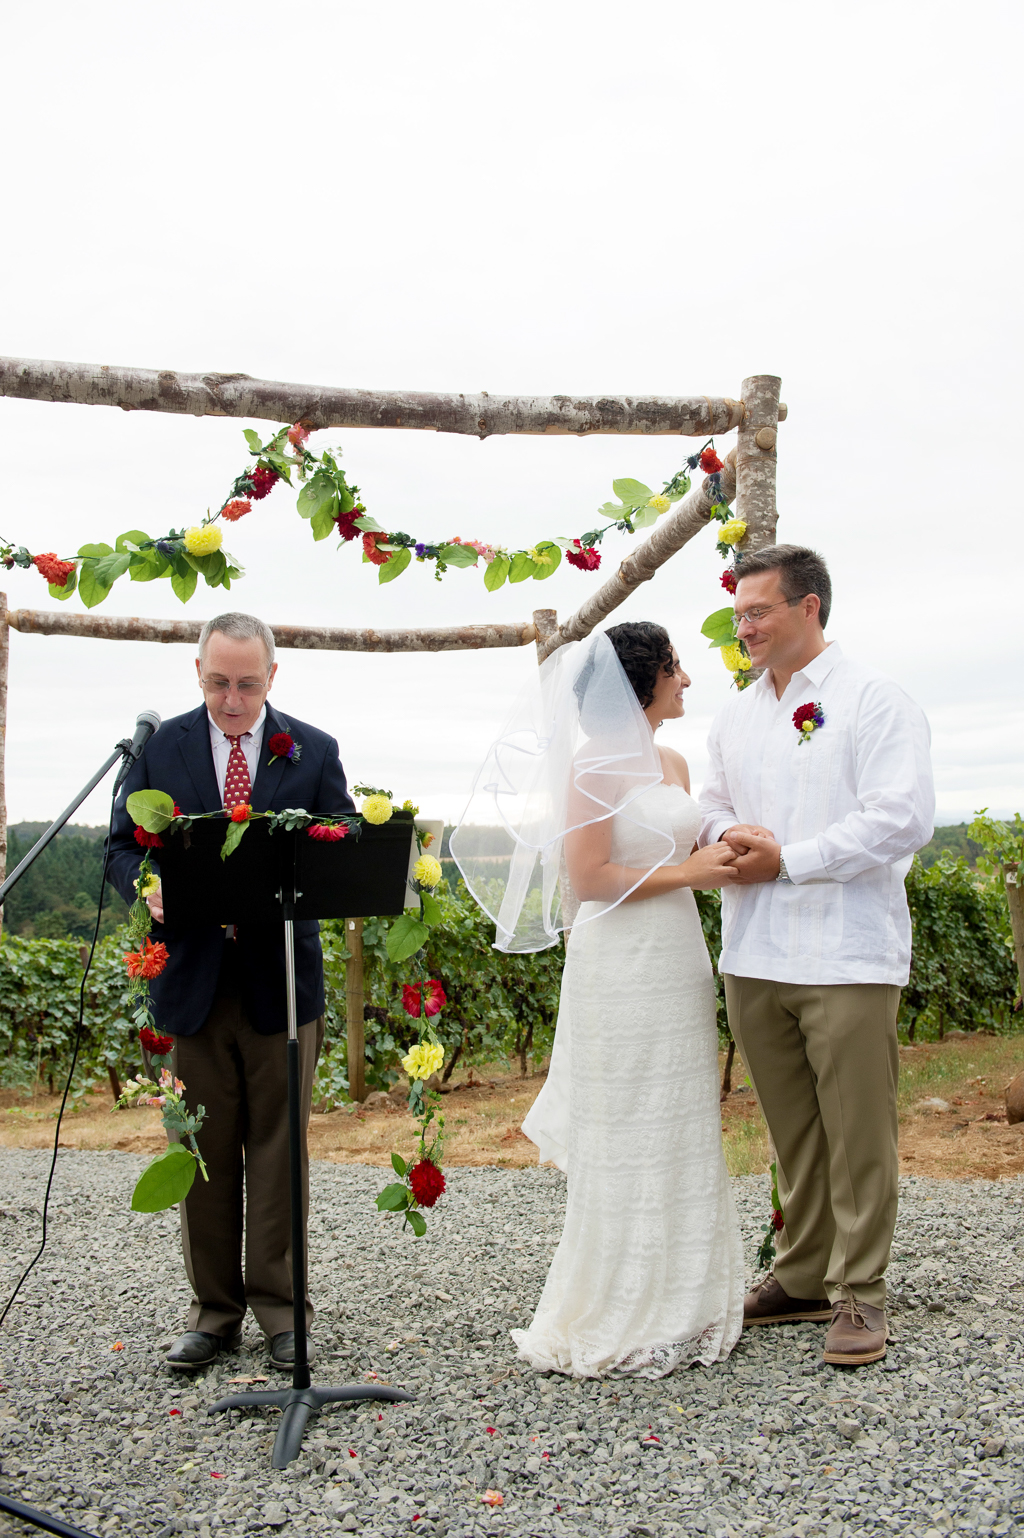 bride and groom stand during wedding ceremony in front of red and yellow flowers hang from a wedding arbor made of birch logs